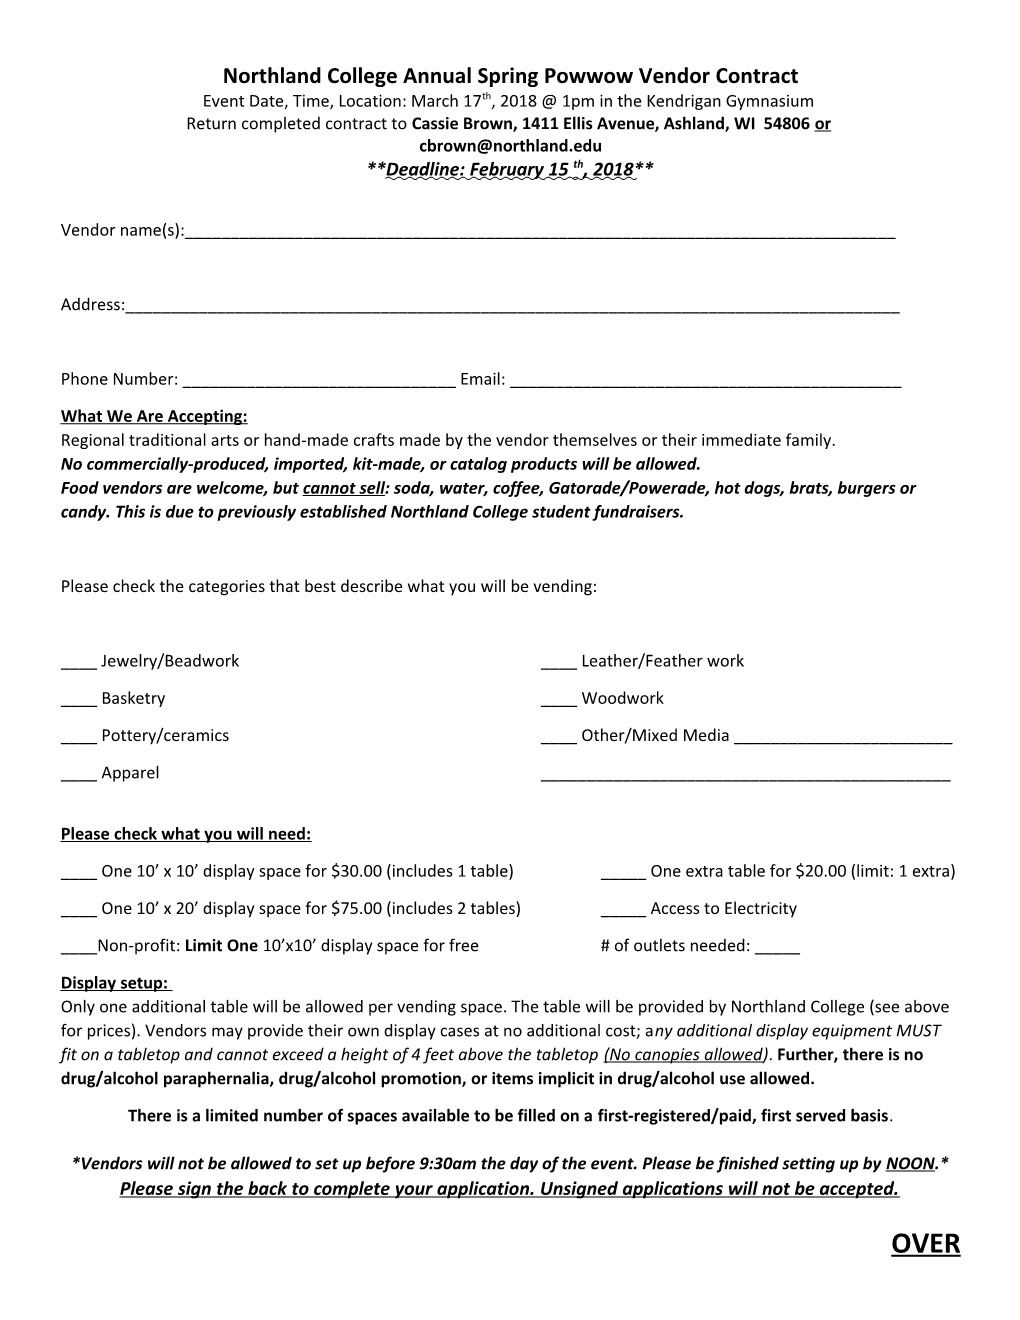 Northland College Annual Spring Powwow Vendor Contract